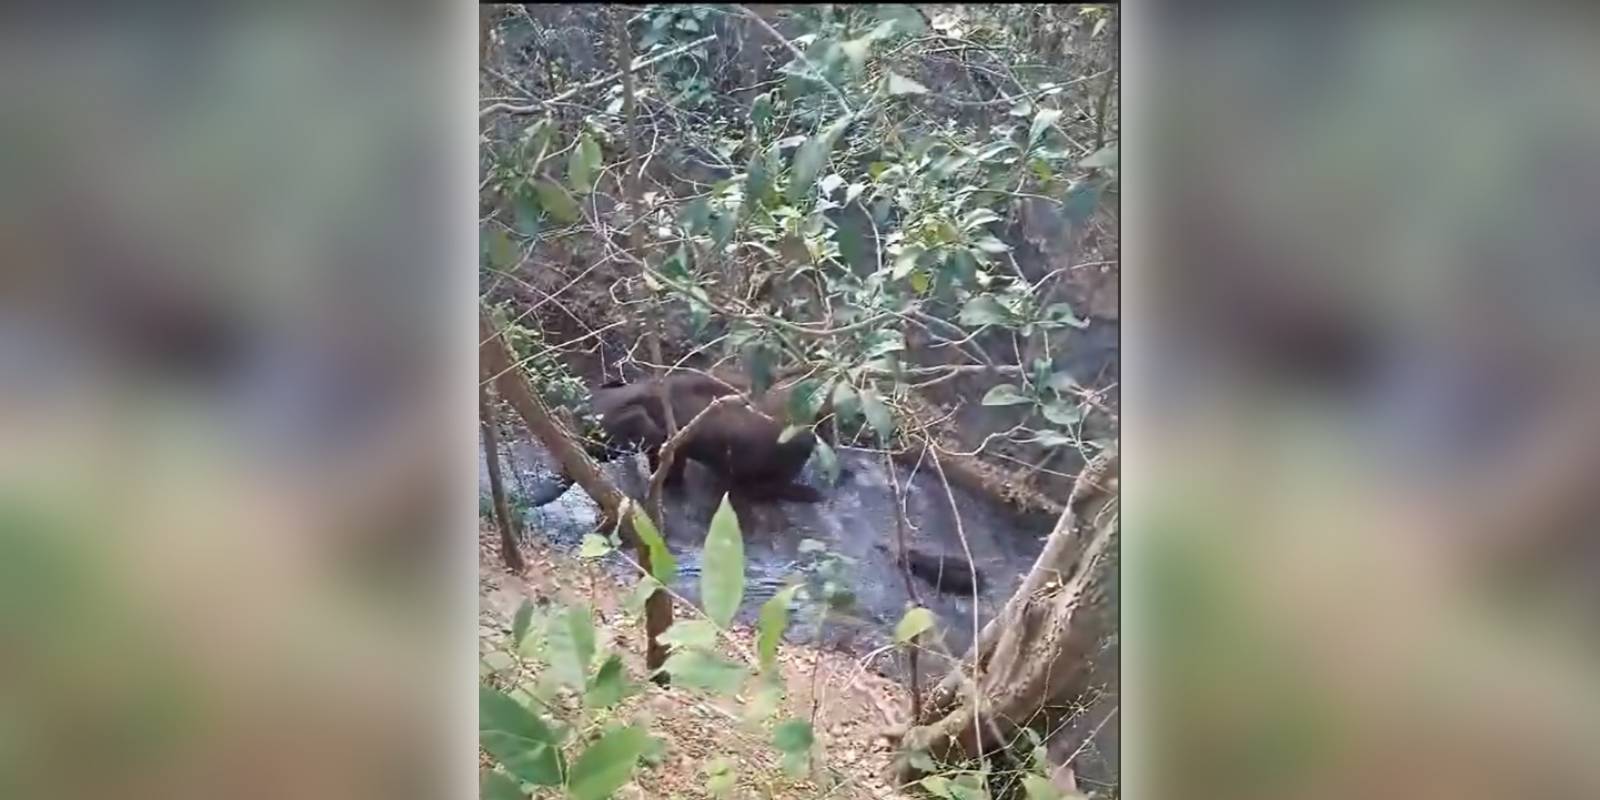 Video clips of baby elephant rescue by Pollachi foresters go viral